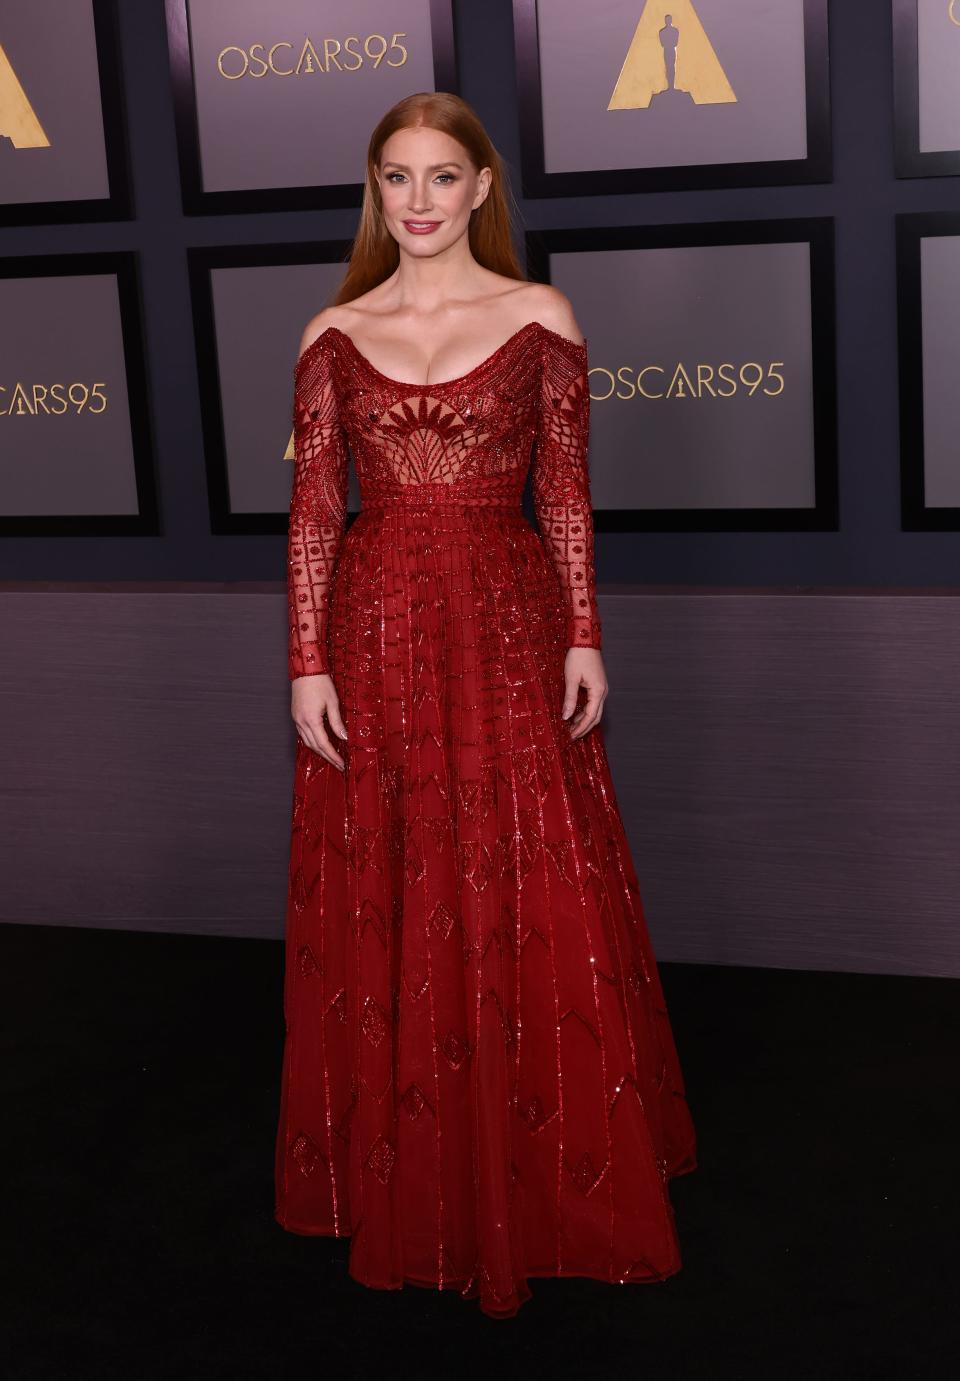 Jessica Chastain in a red, lace gown